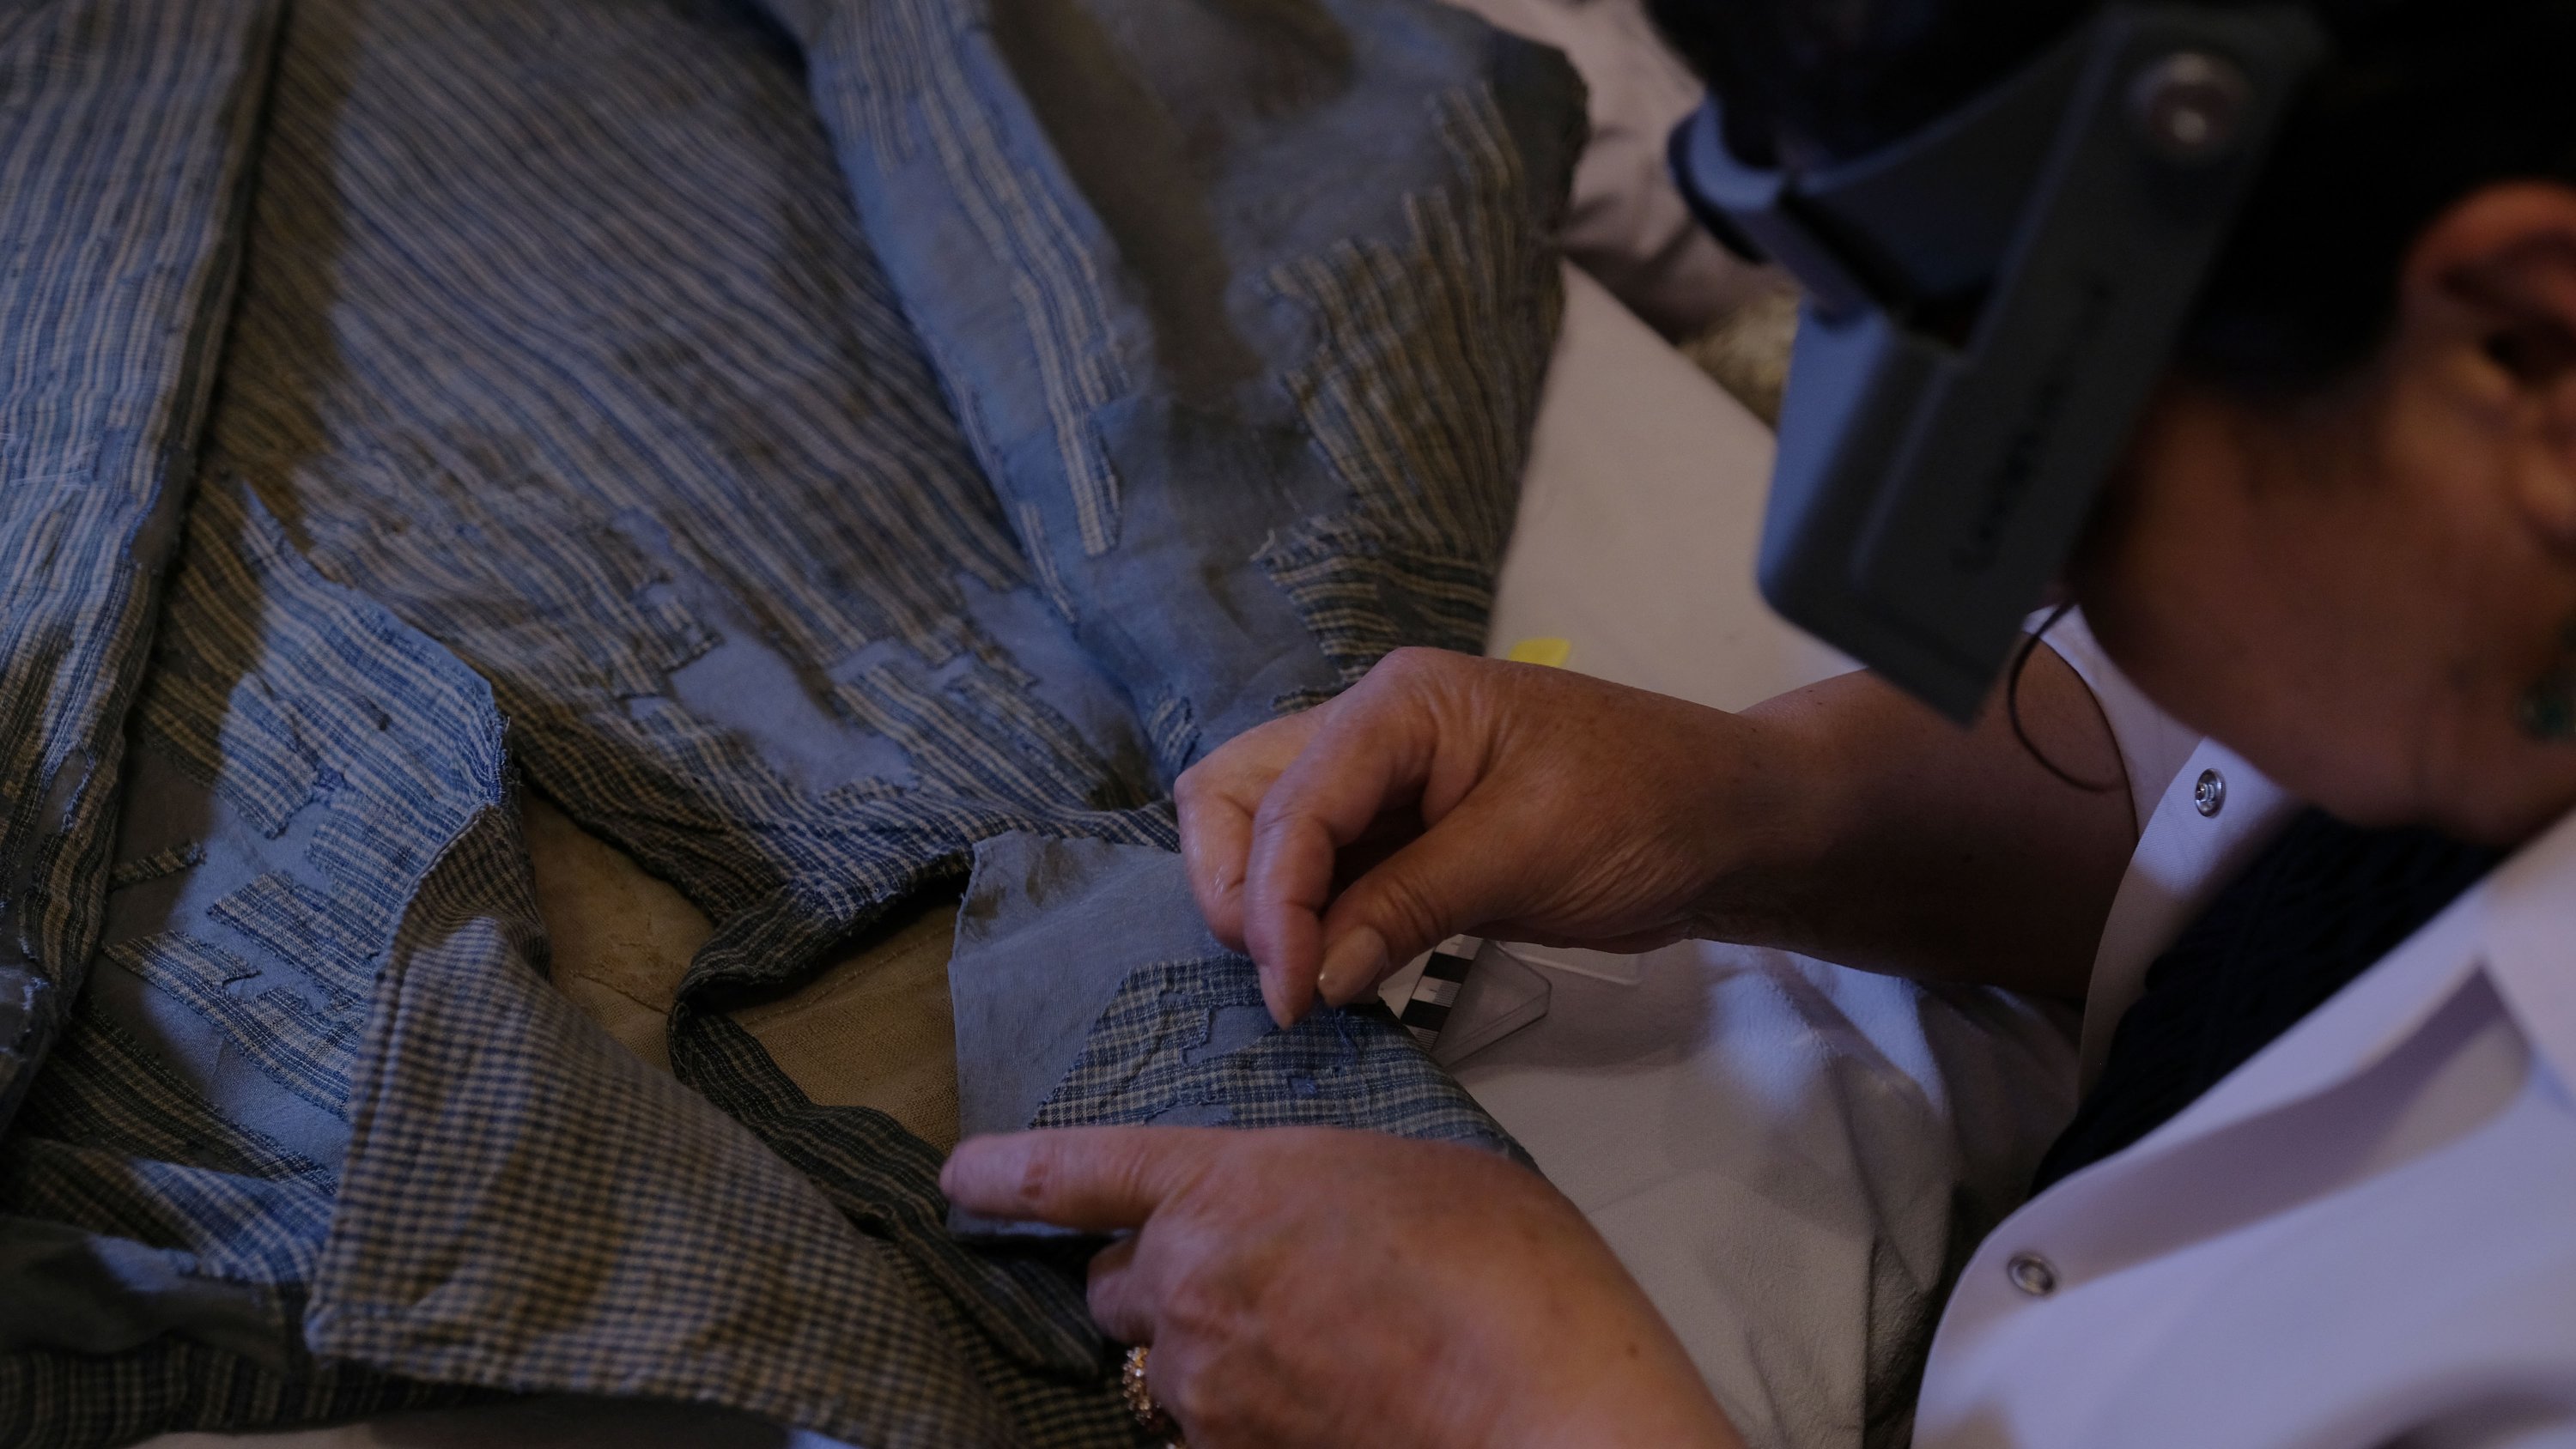 The clothes of Mevlana Jalaluddin Rumi kept in special boxes for years have come to light for restoration work, Konya, Turkey, June 18, 2022. (DHA Photo)